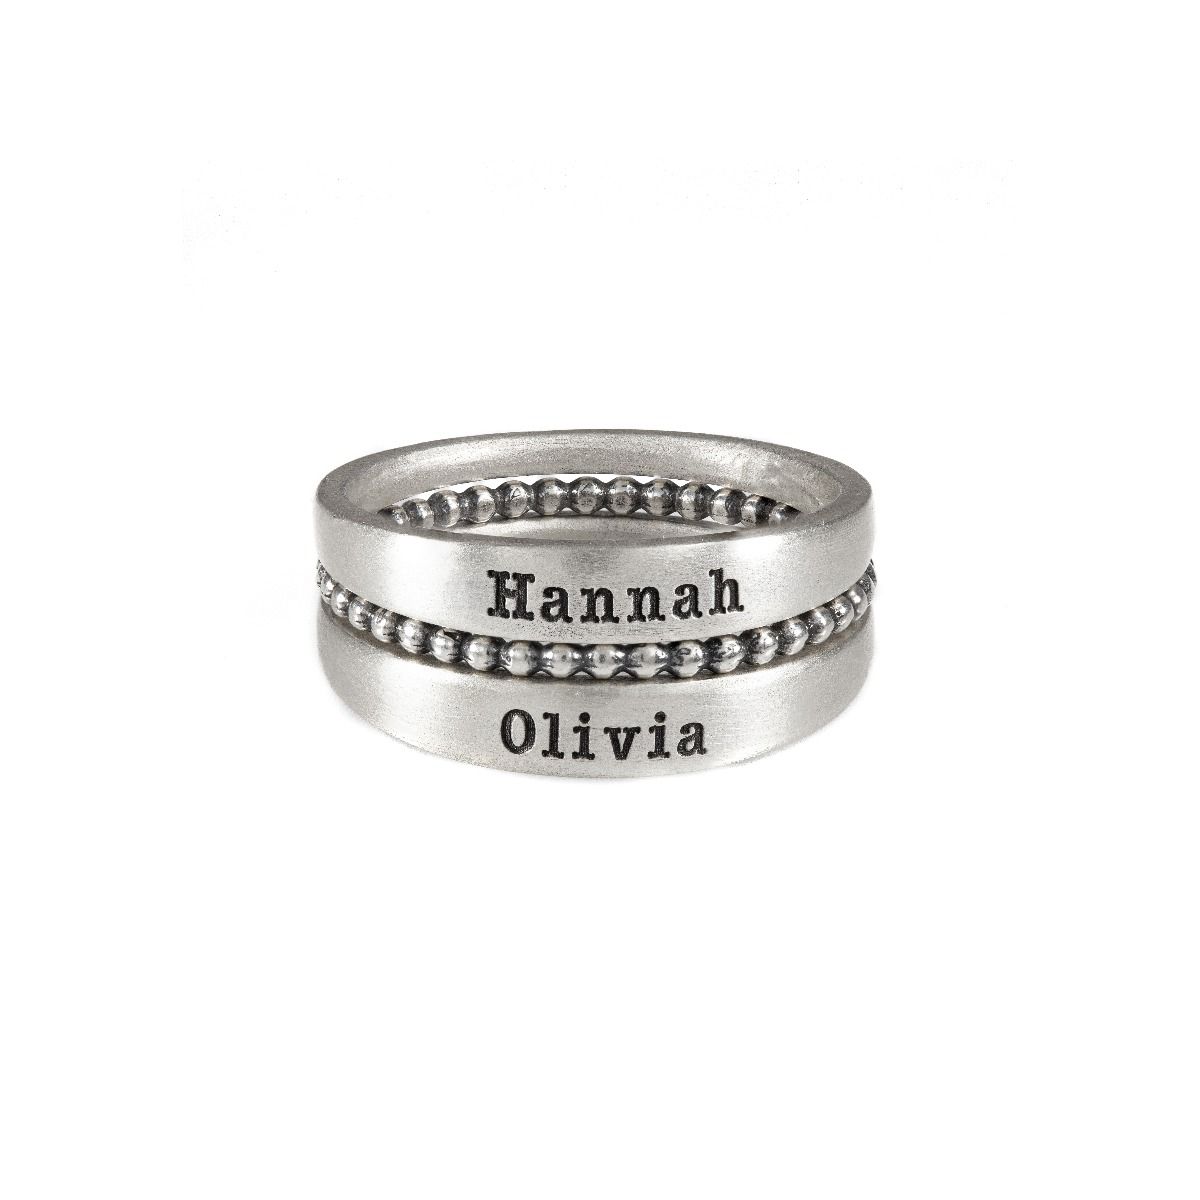 7 mm Name or Date Cutout Ring | Engraved Custom Date Rings